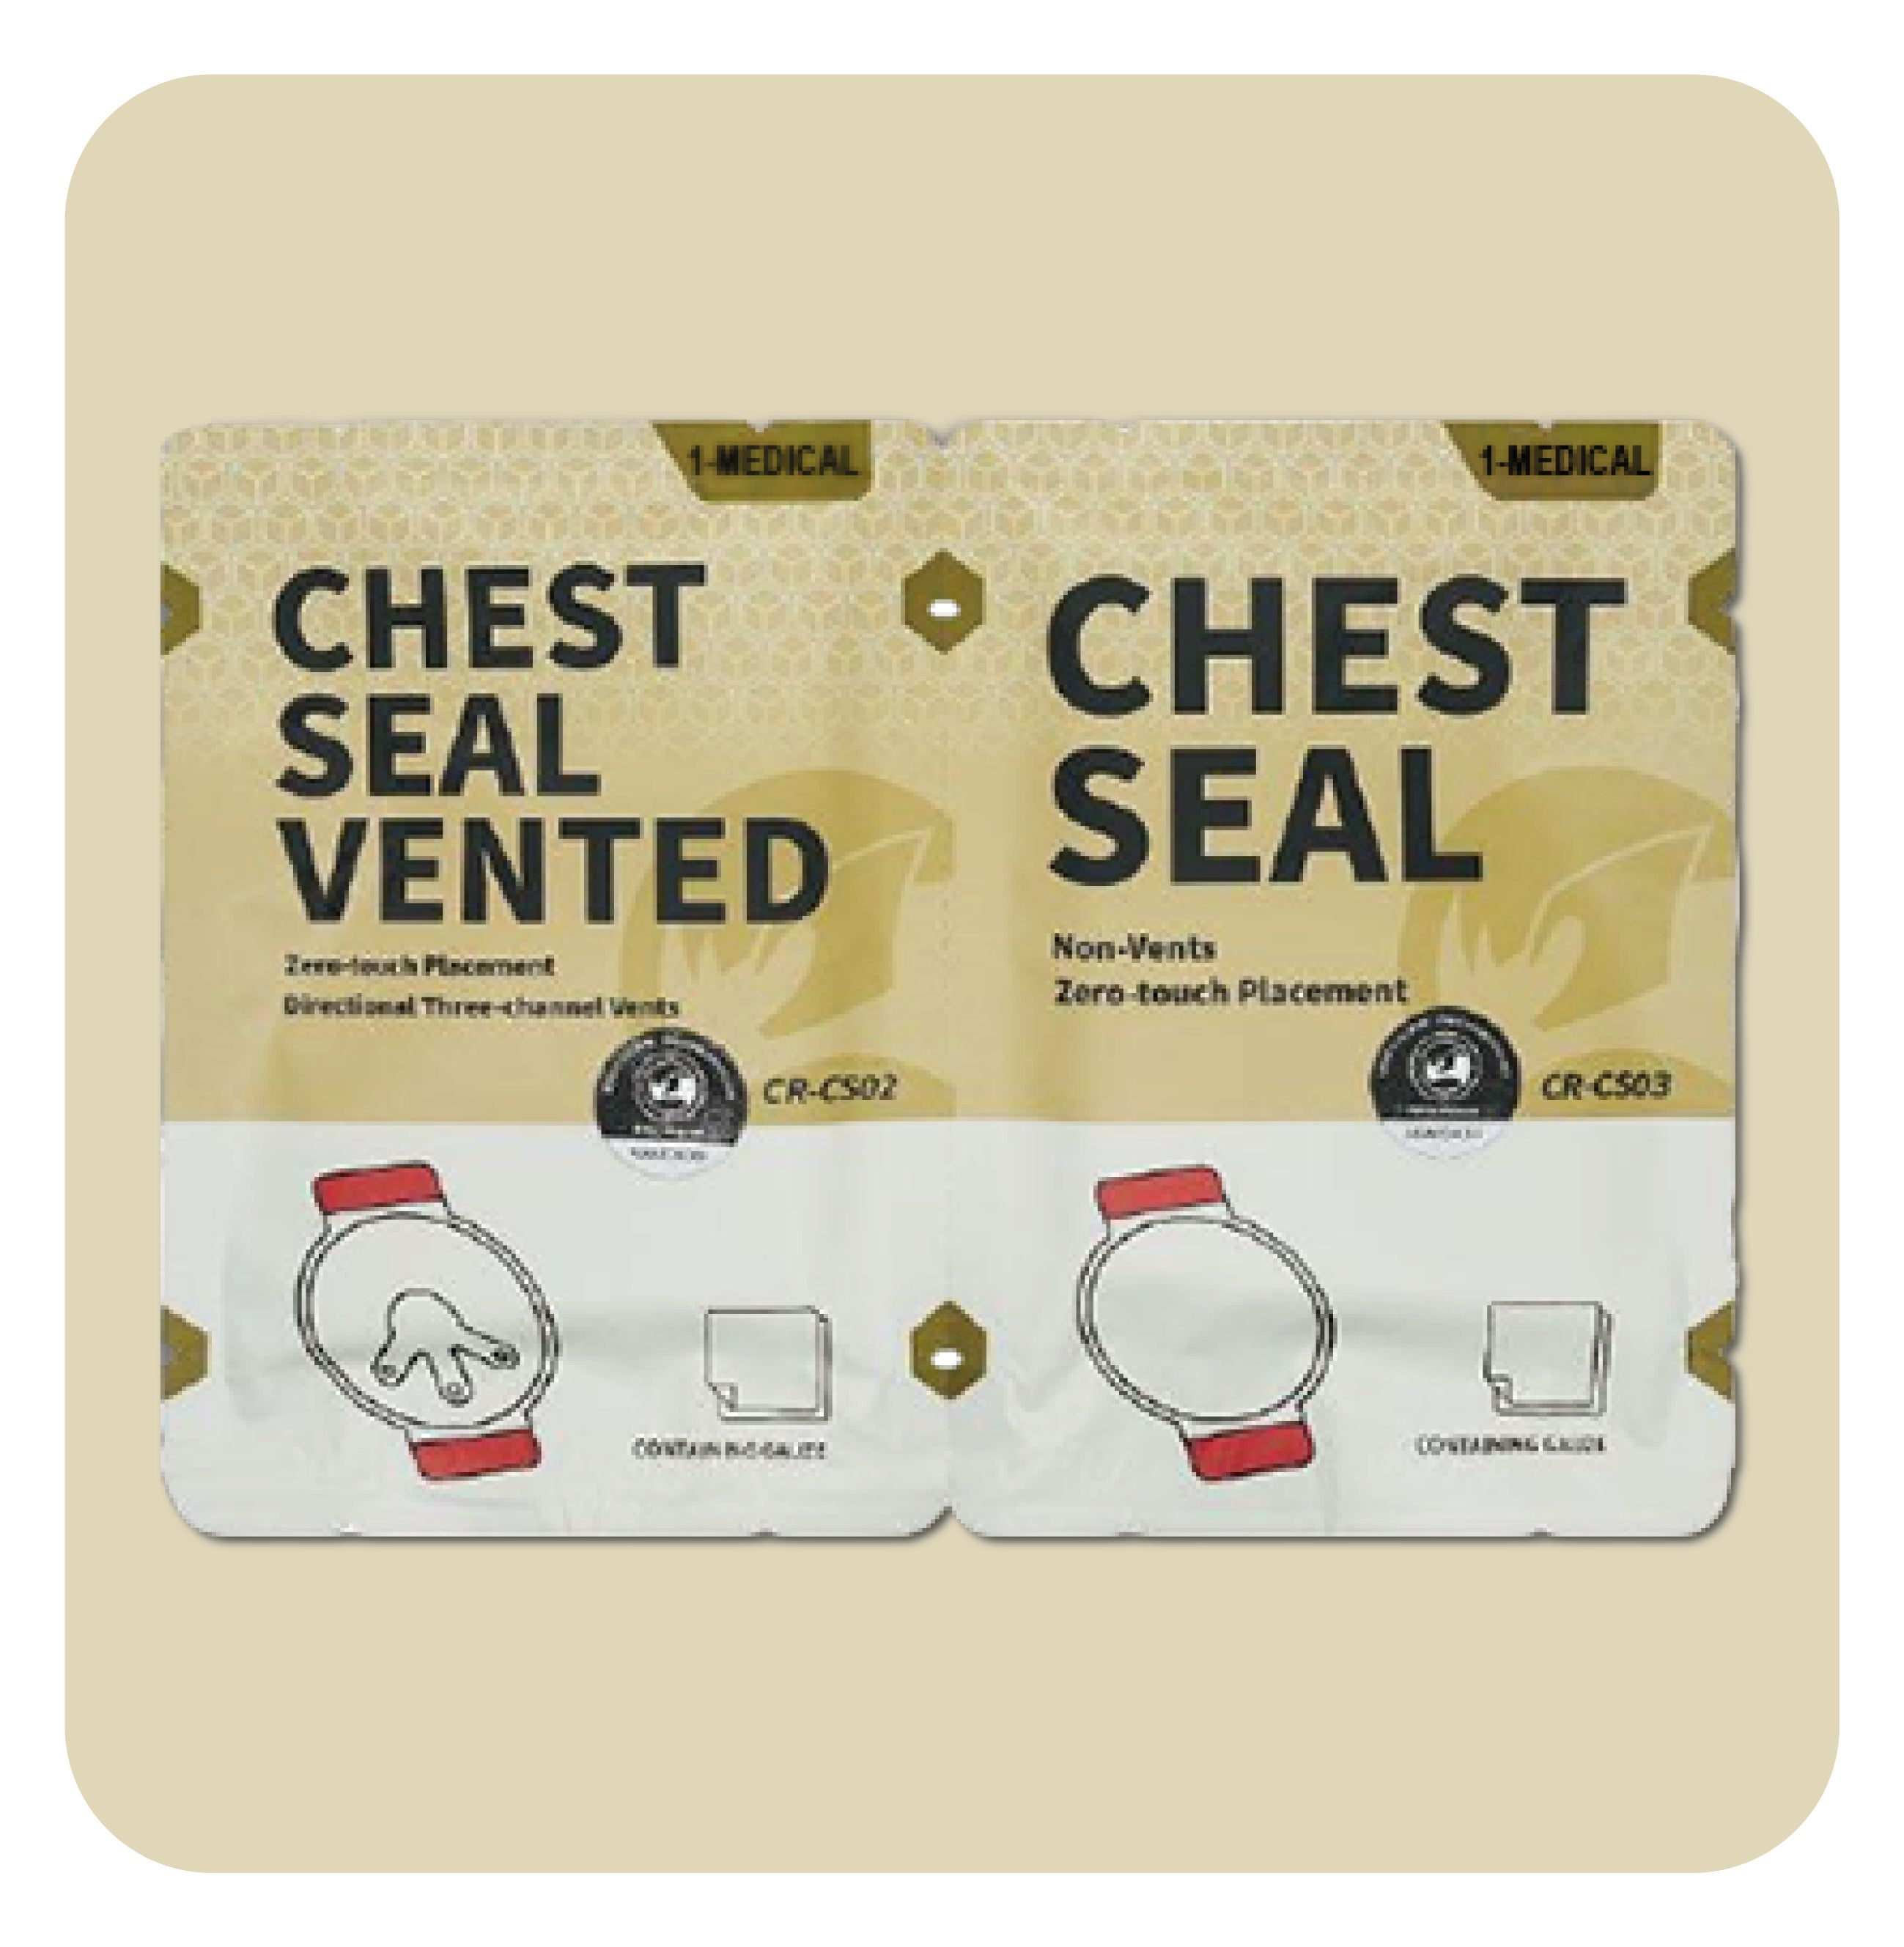 Thoracic seal - Twin pack